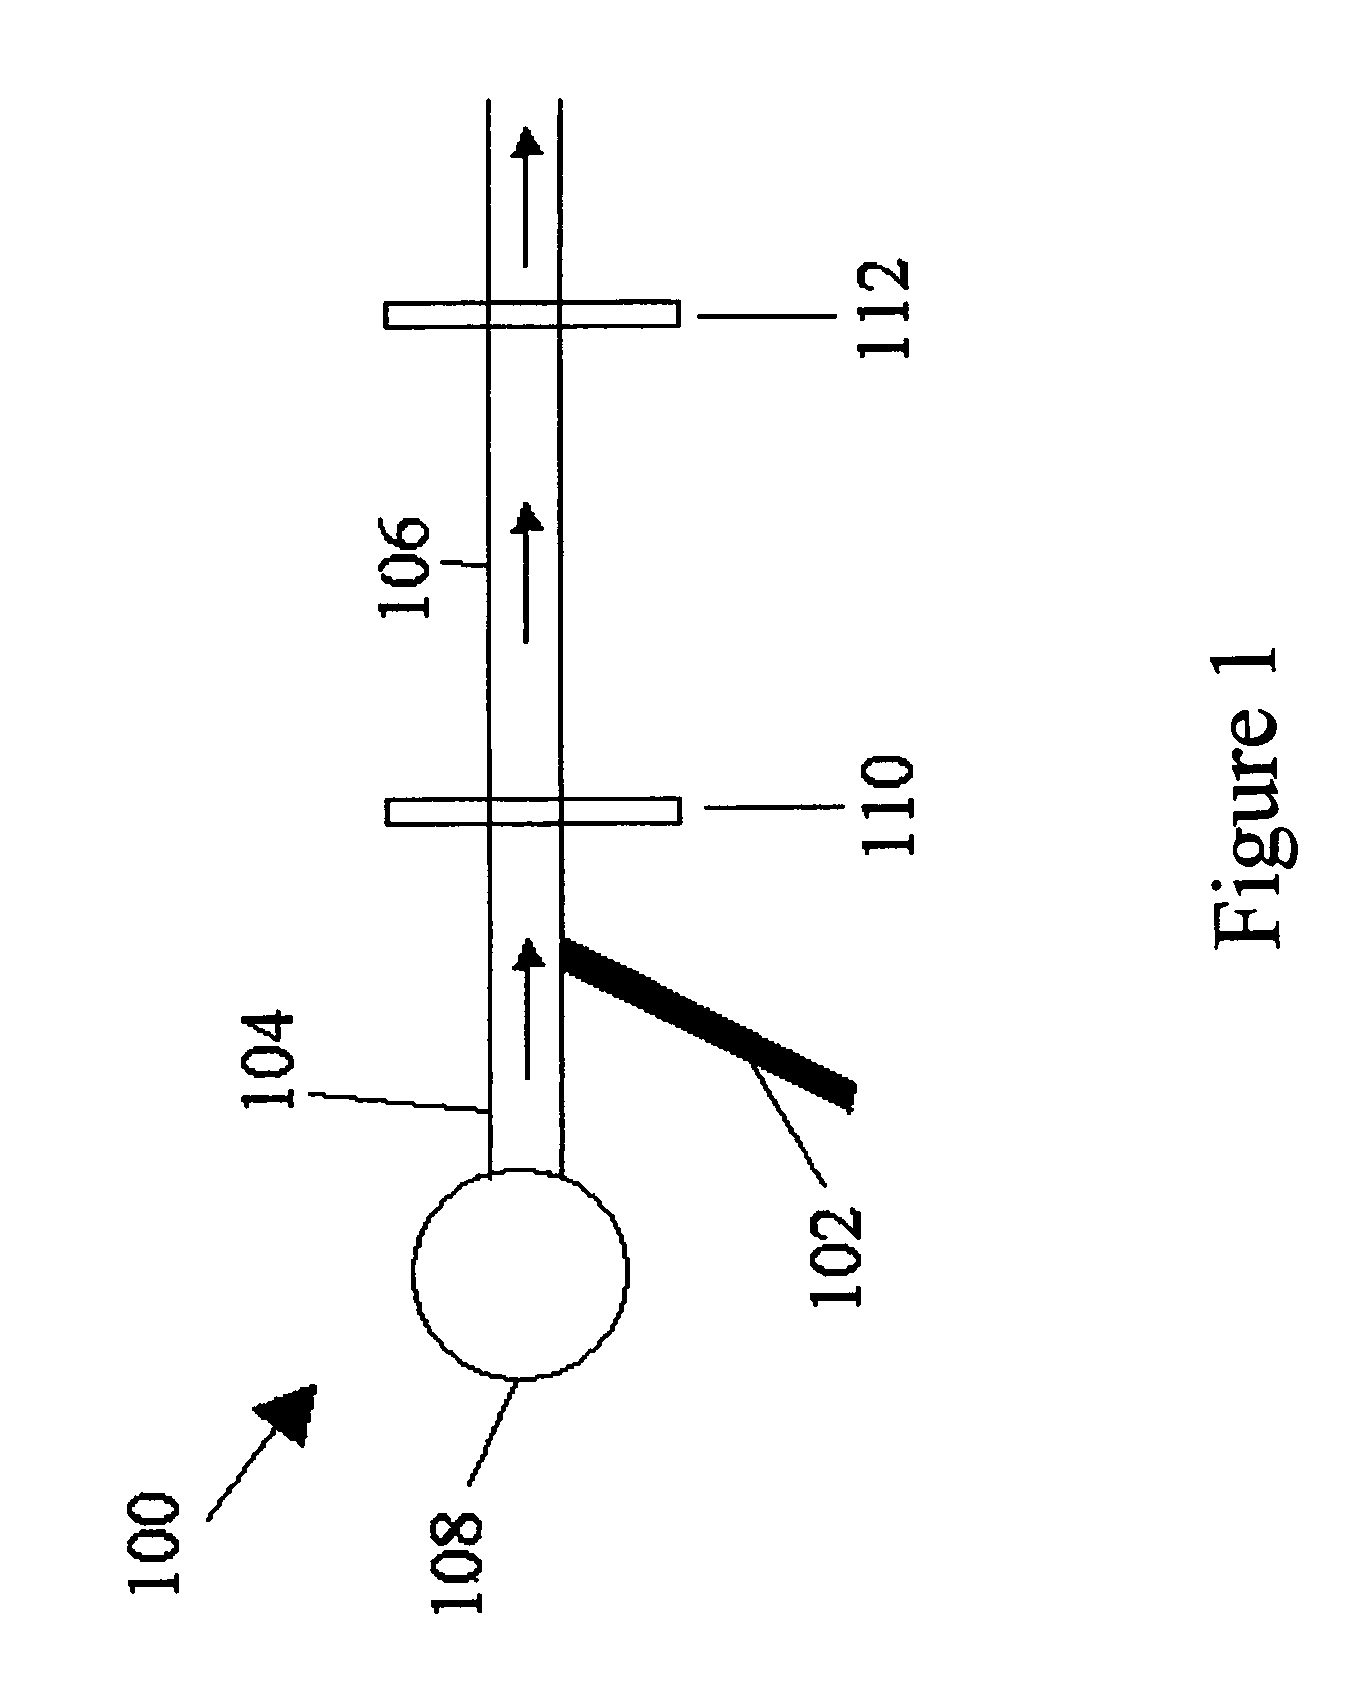 Method for measuring diffusivities of compounds using microchips